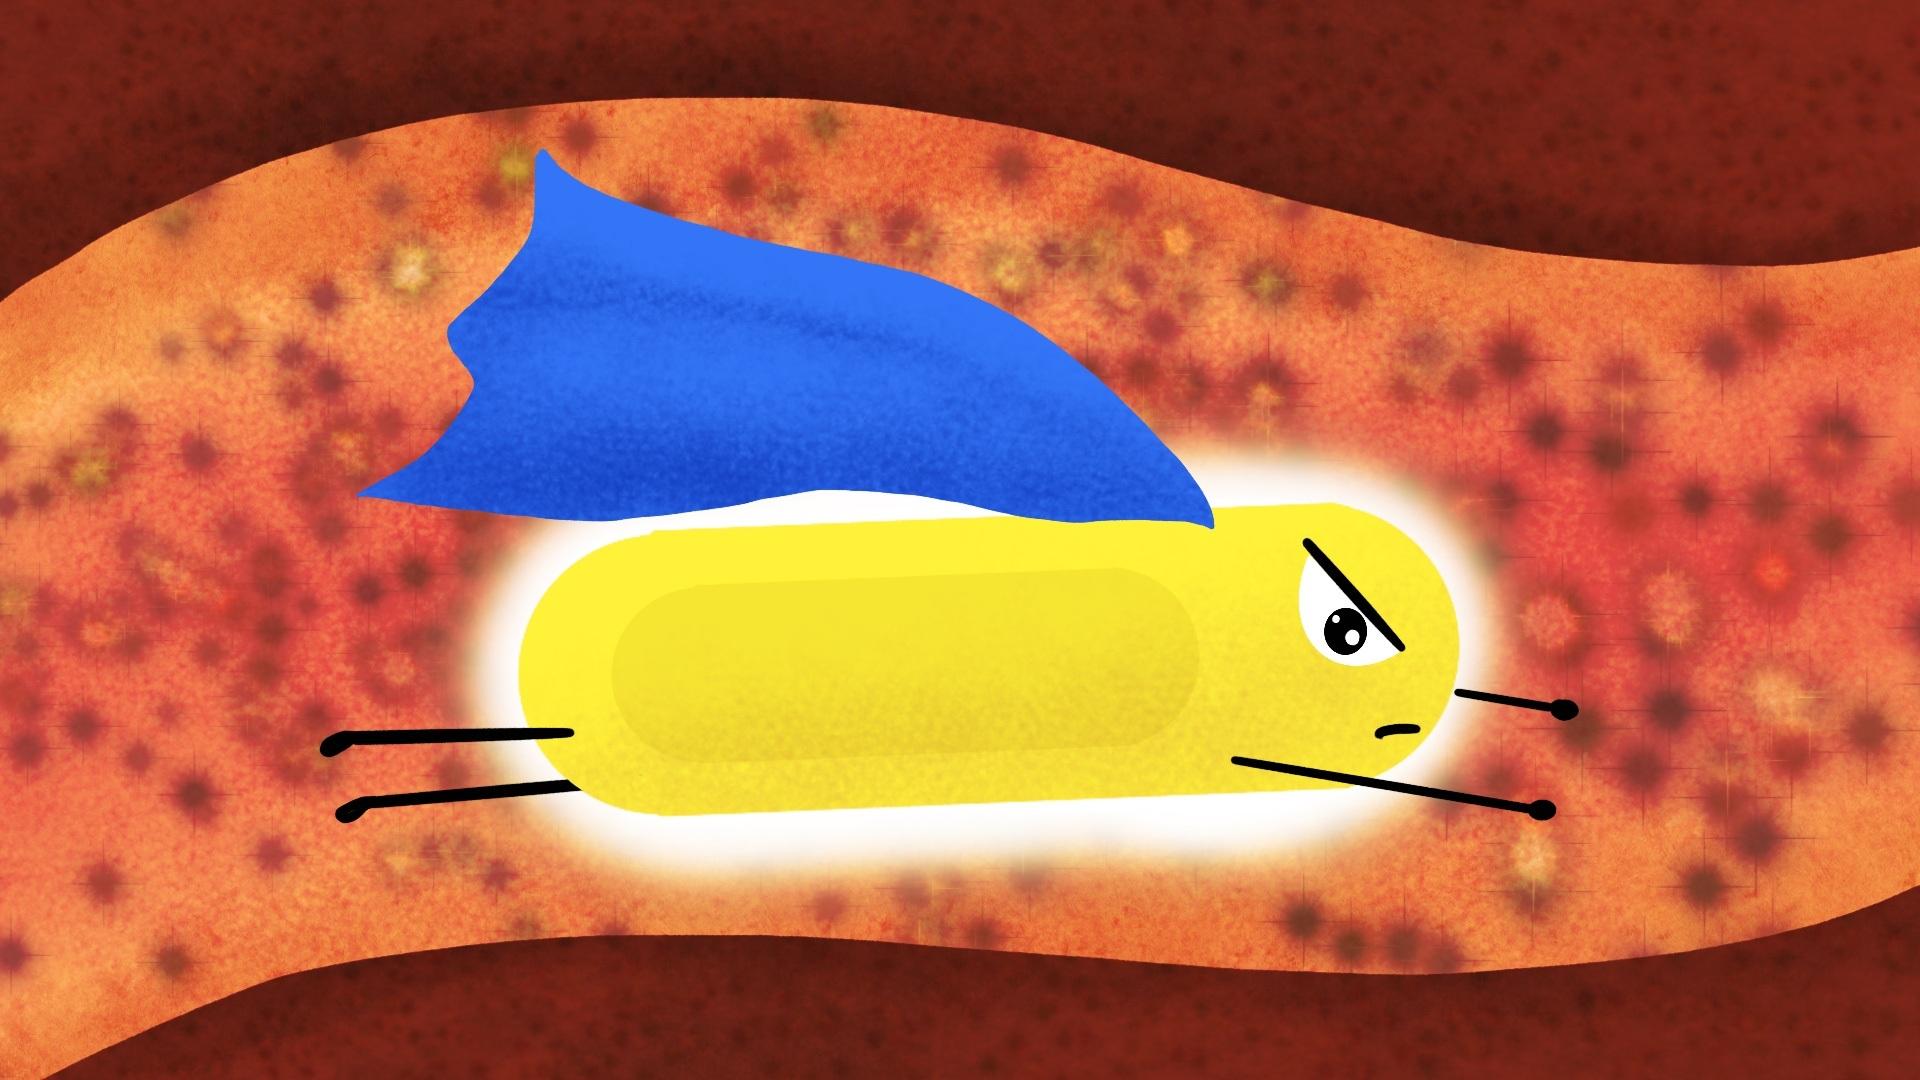 Illustration of a capsule wearing a cape inside the digestive tract